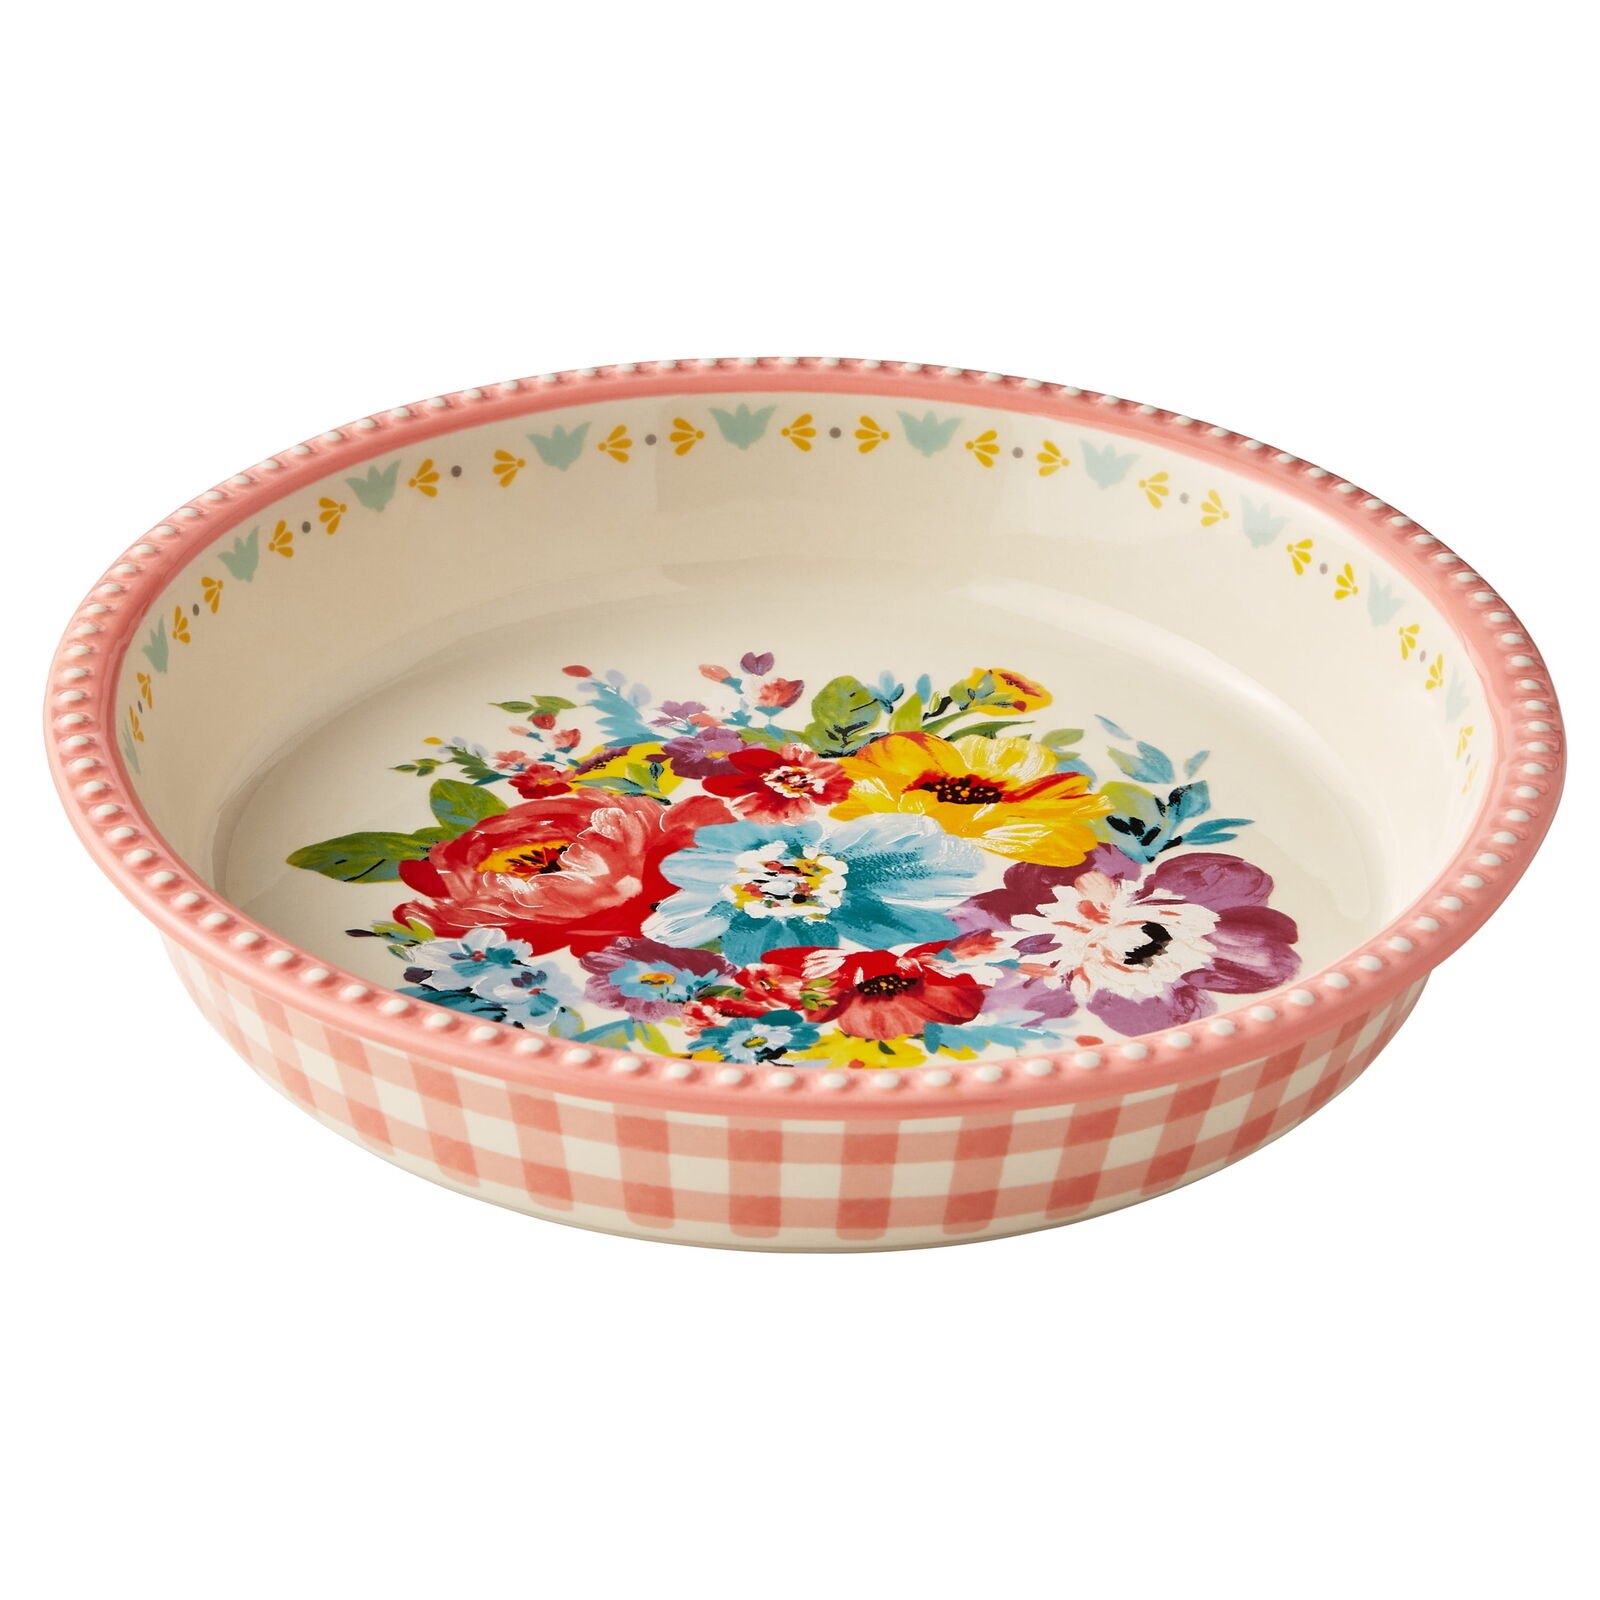 The Pioneer Woman Sweet Romance Blossoms 9-inch Ceramic Pie Plate，US